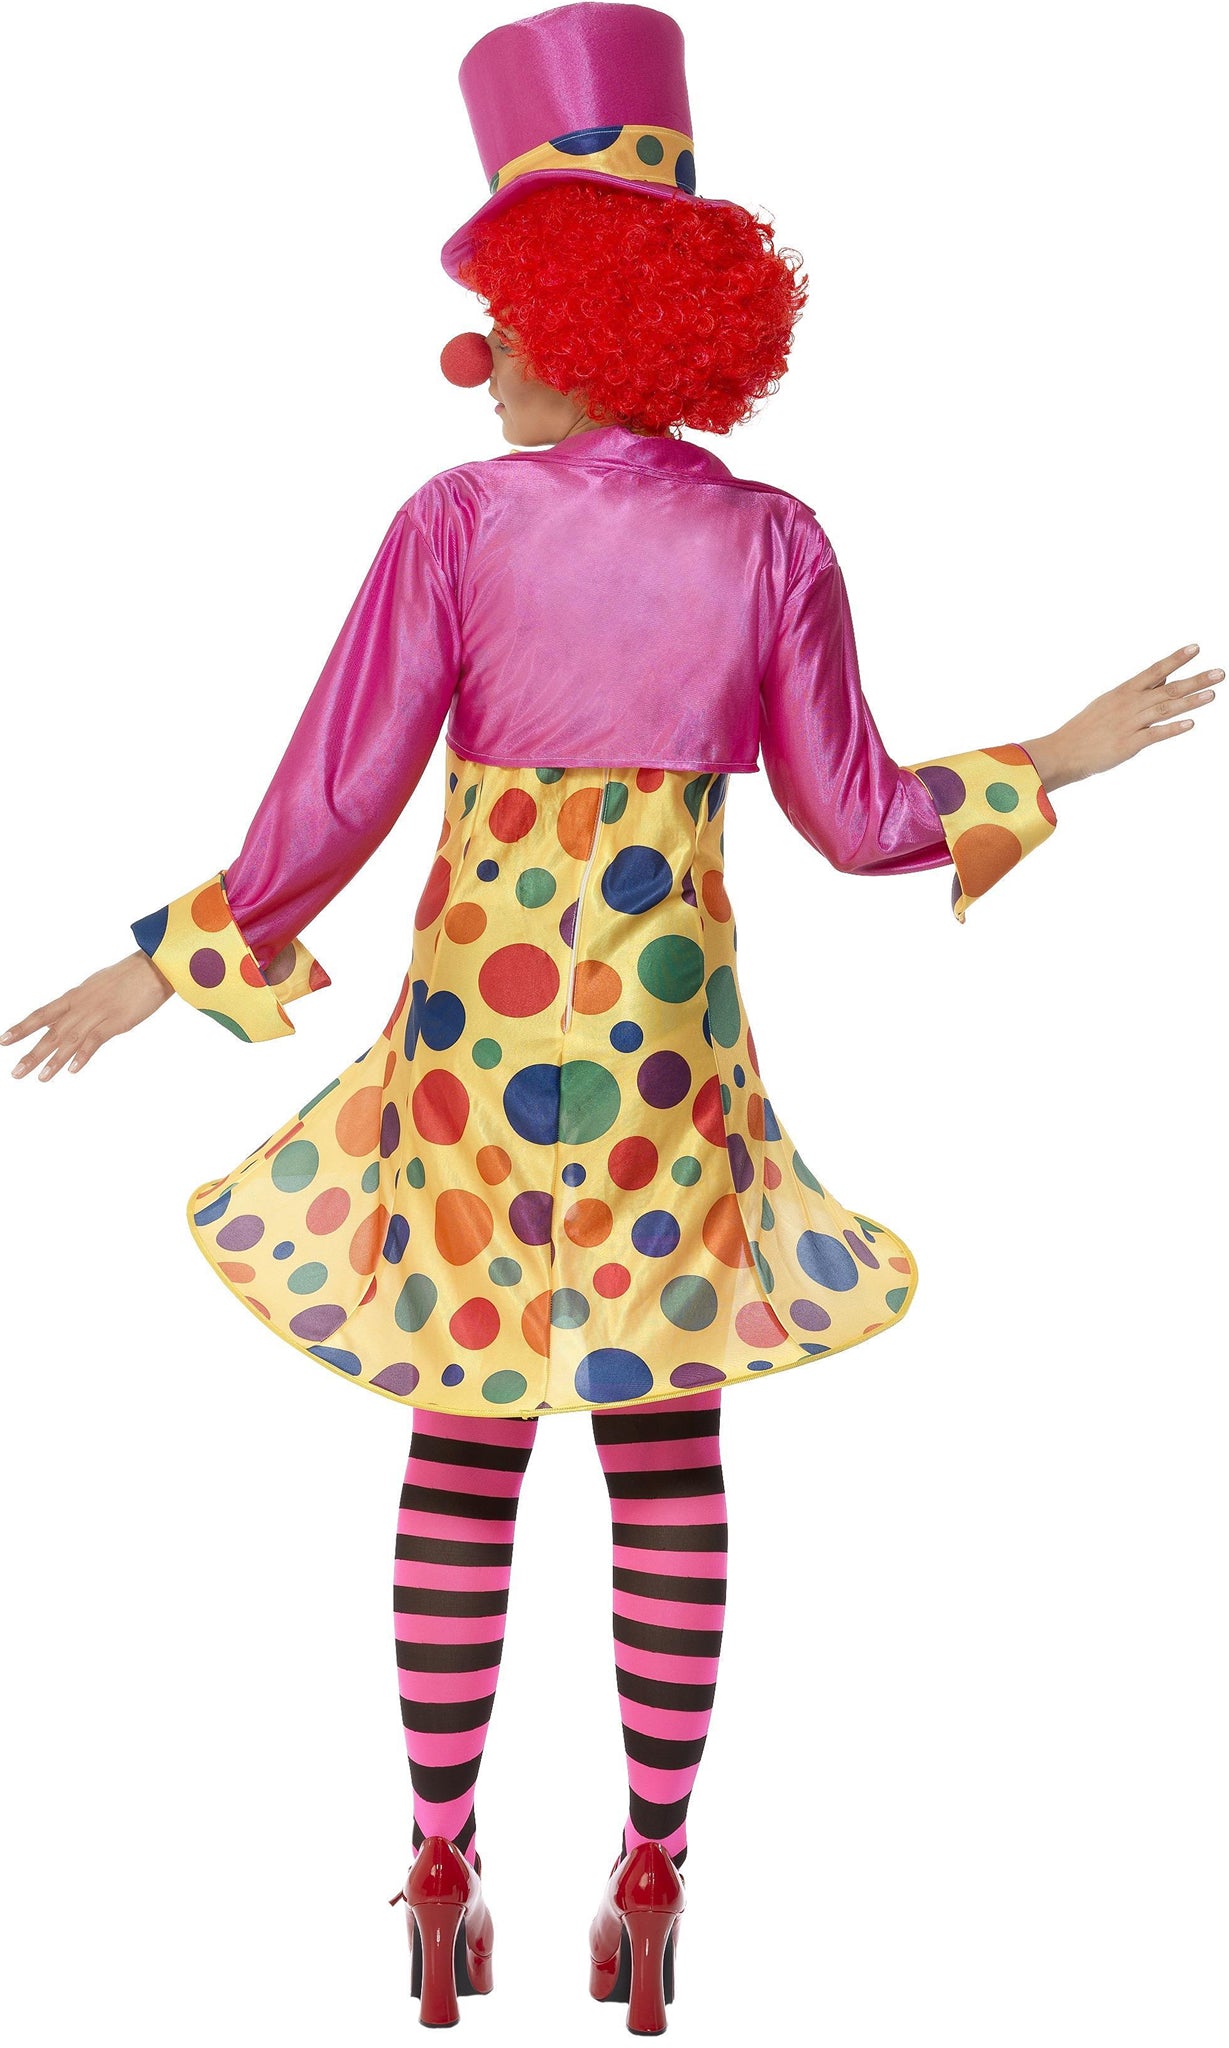 Back of hooped clown dress with polka dots, pink jacket, bow tie and hat